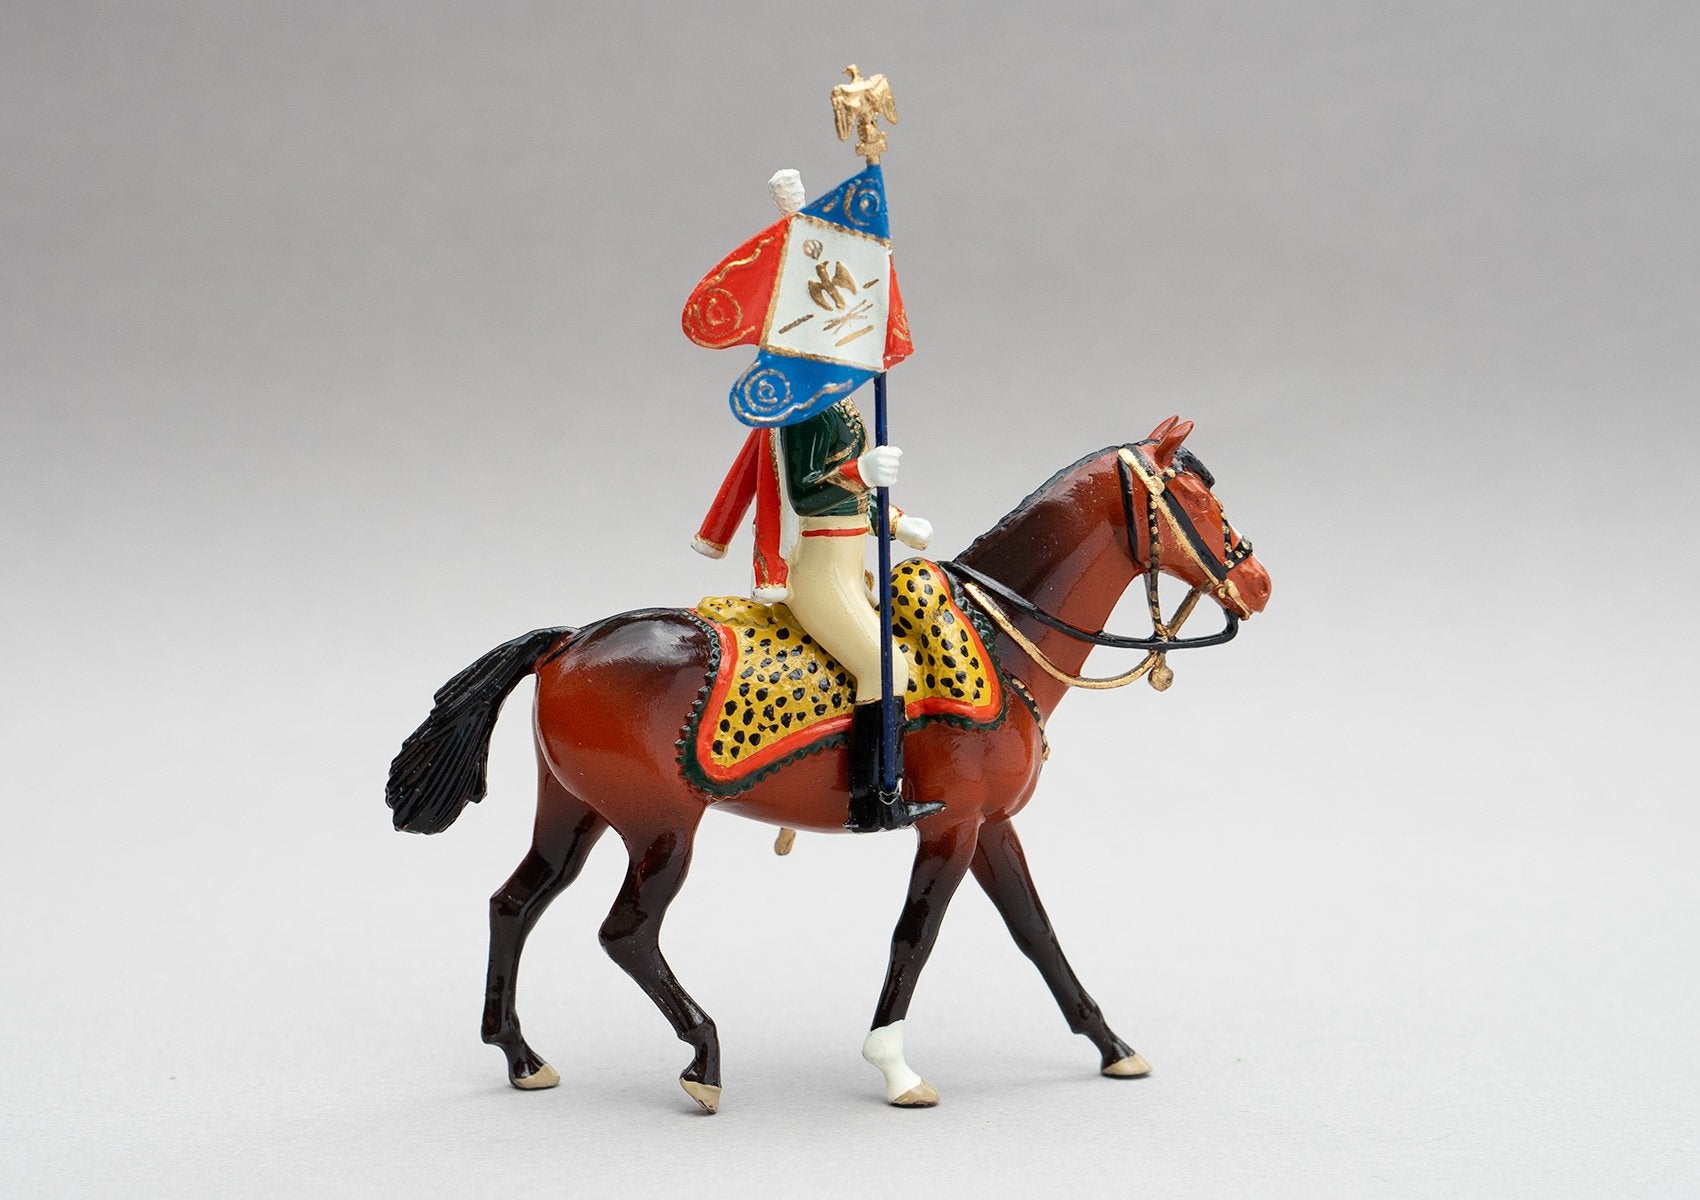 Set 97 Chasseurs à Cheval, Standard Bearer | French | Napoleonic Wars | Single mounted figure on bay horse | Waterloo | © Imperial Productions | Sculpt by David Cowe